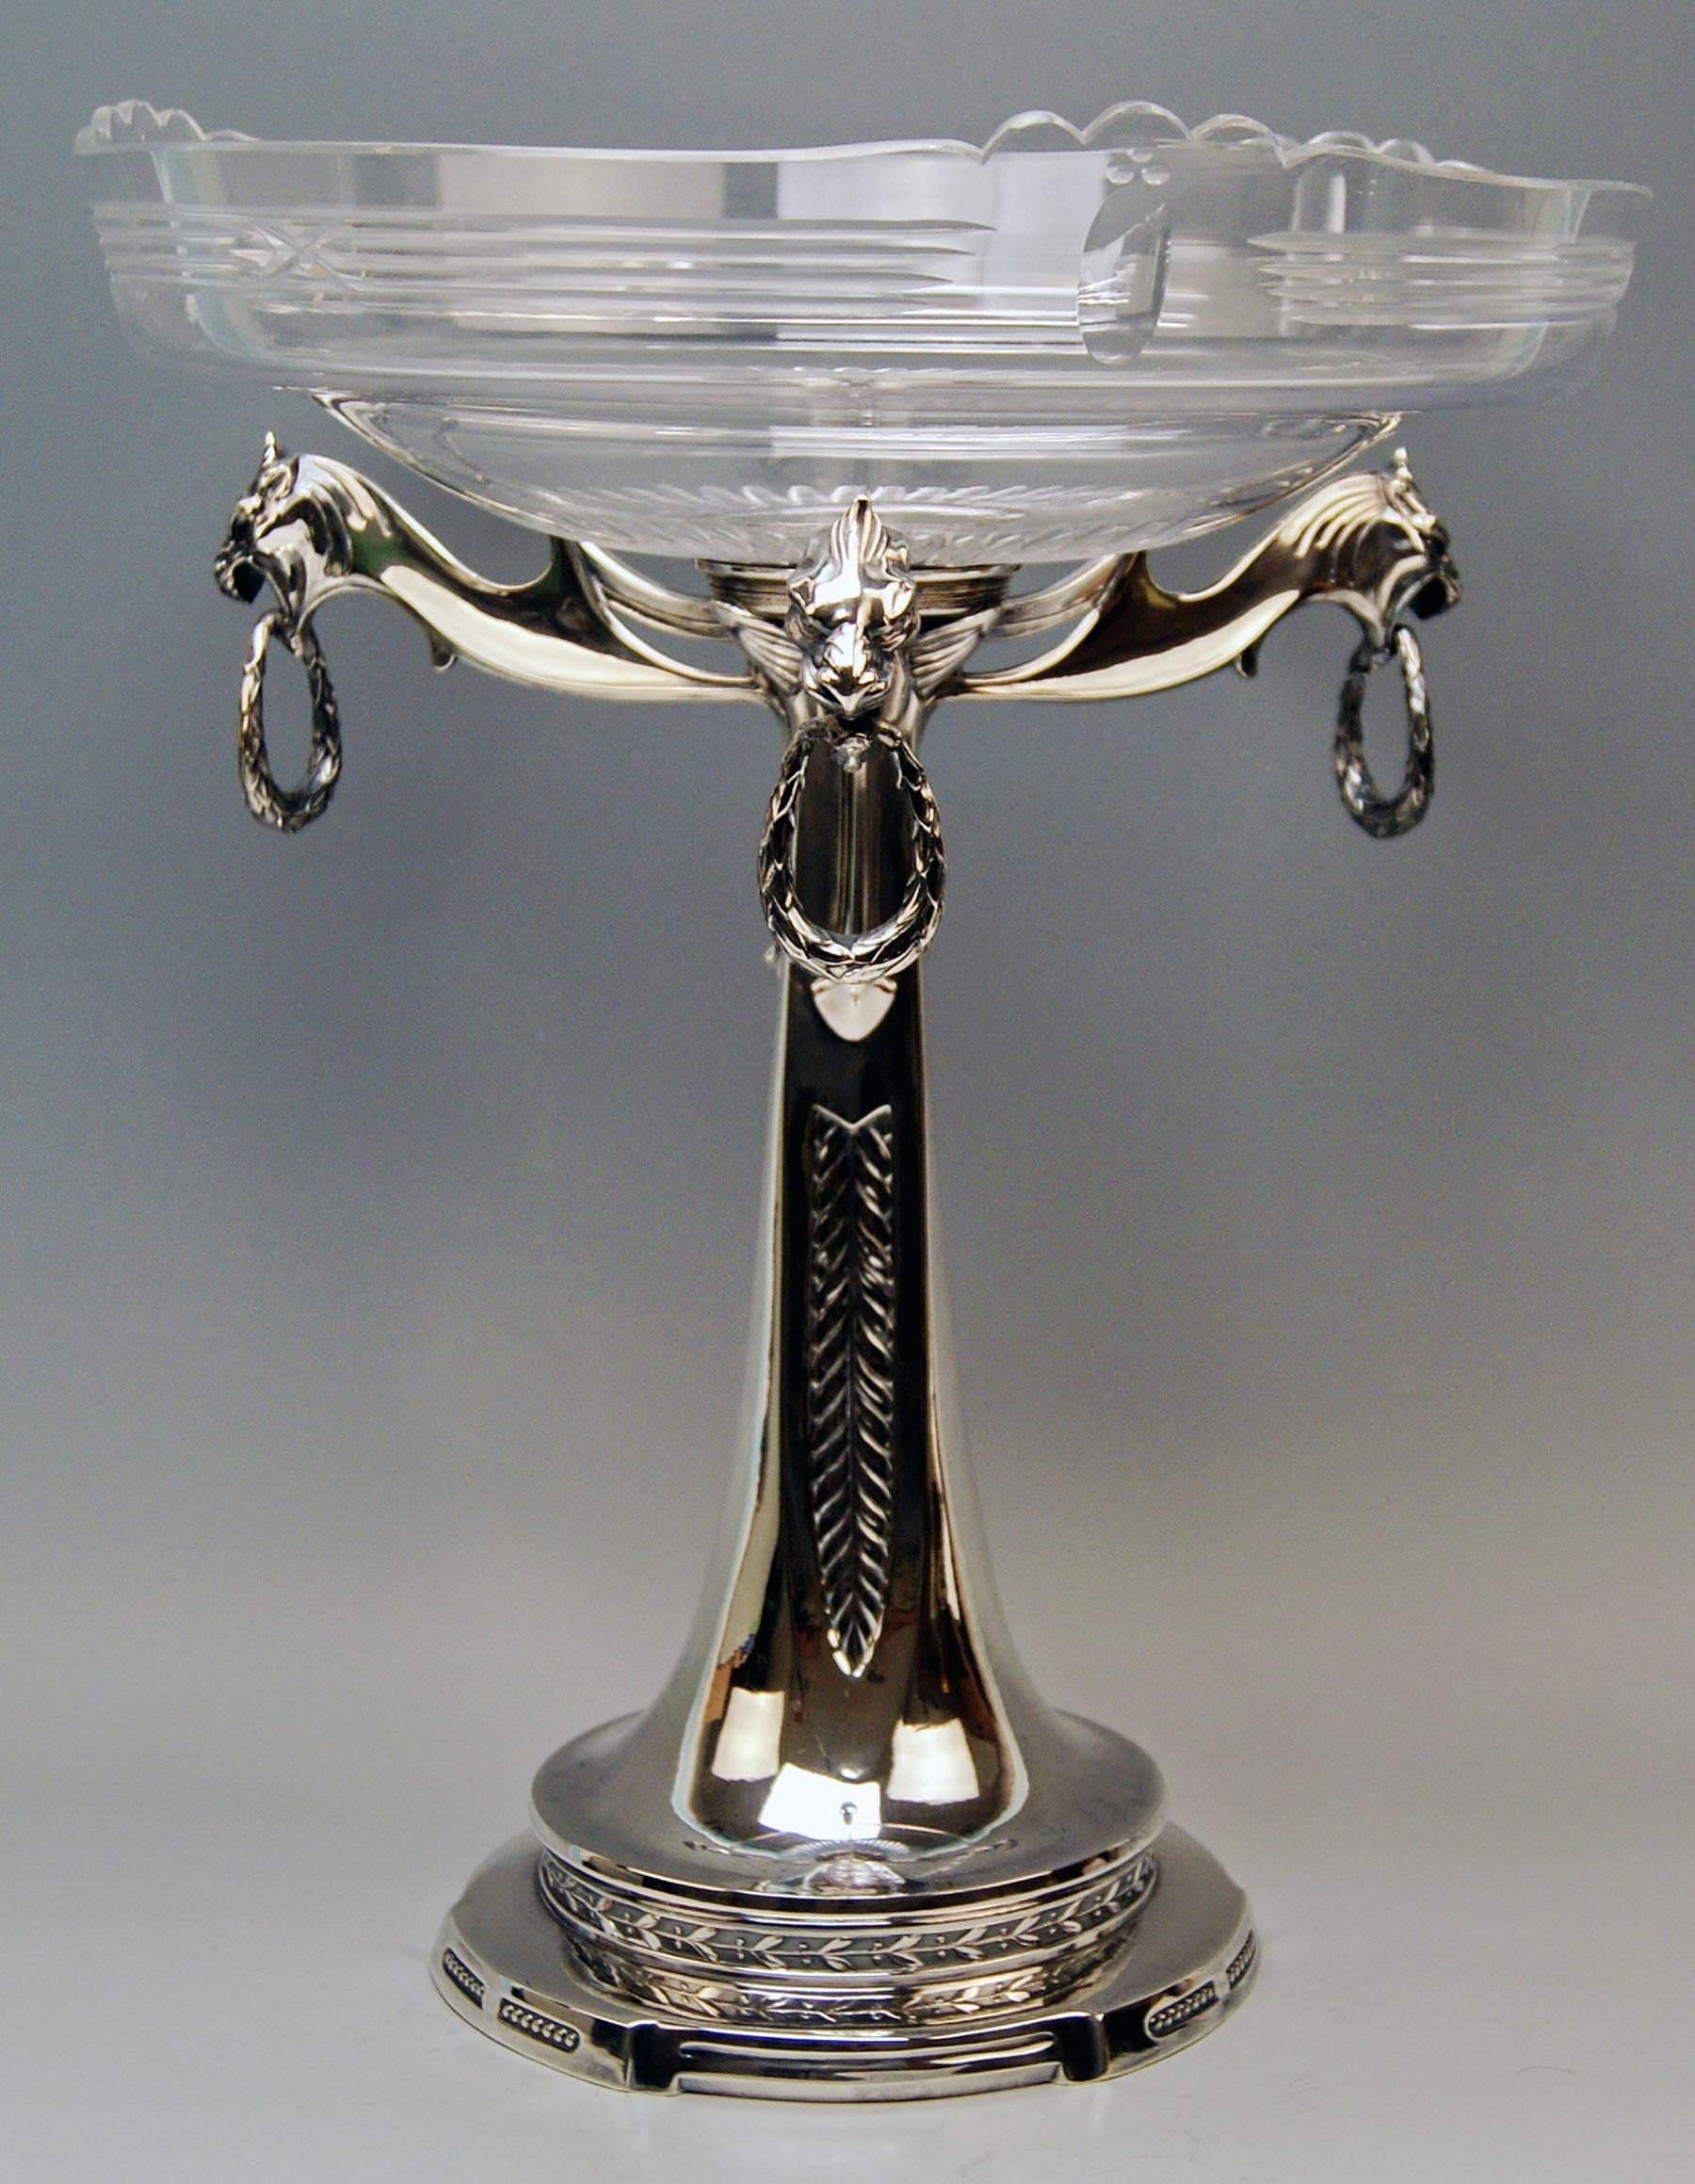 Early 20th Century Three-Part Table Set Centerpiece Pair of Candelabras Silver Plated, Germany 1915 For Sale